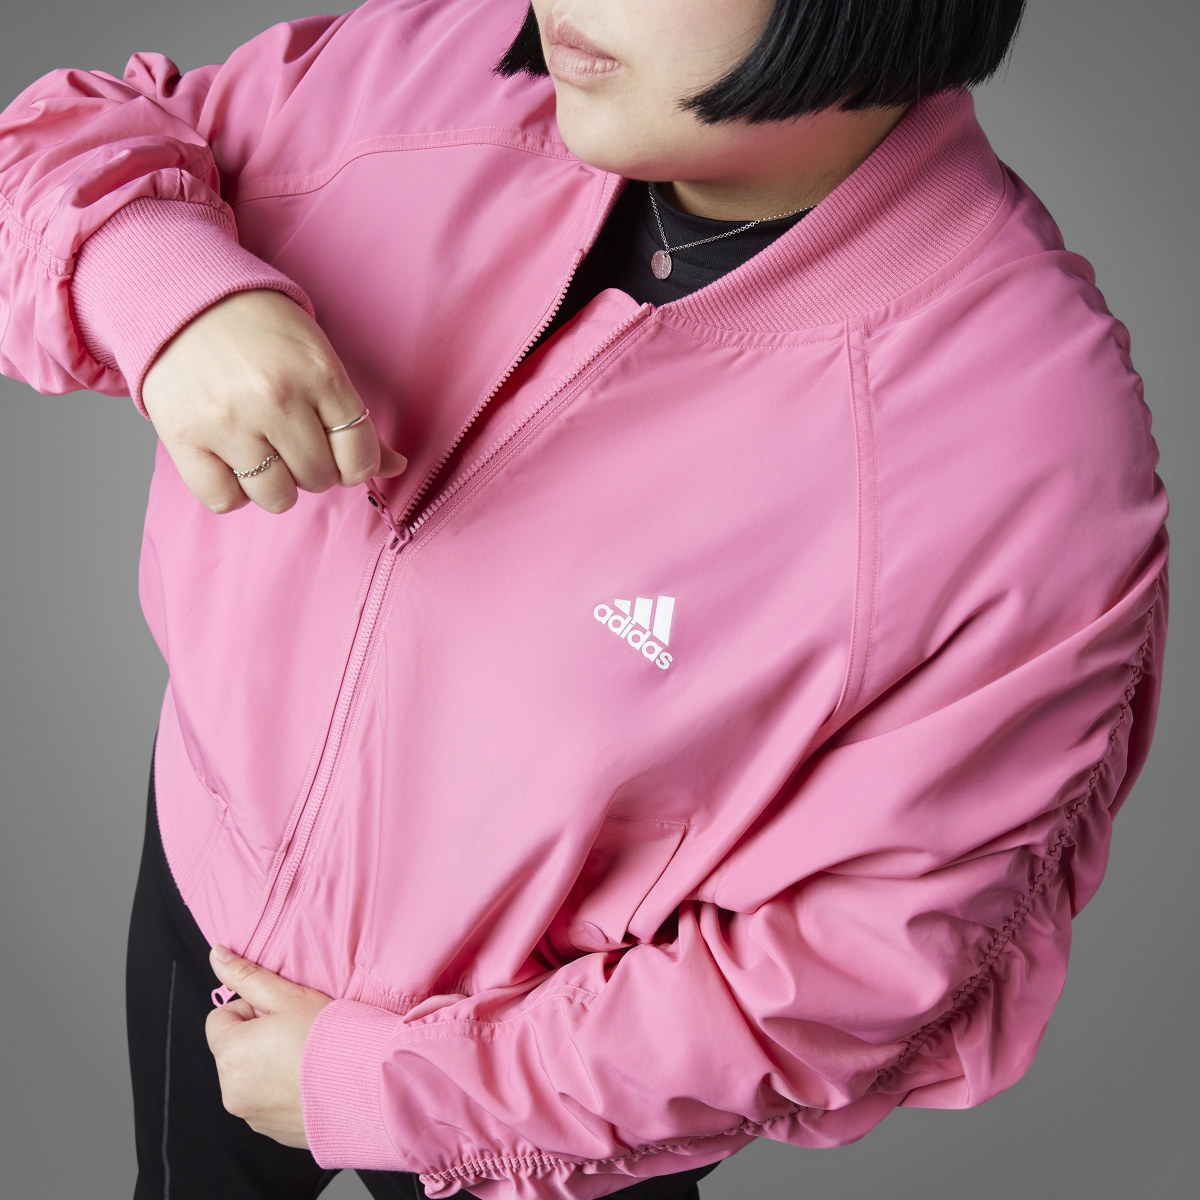 Adidas Collective Power Bomber Jacket (Plus Size). 5